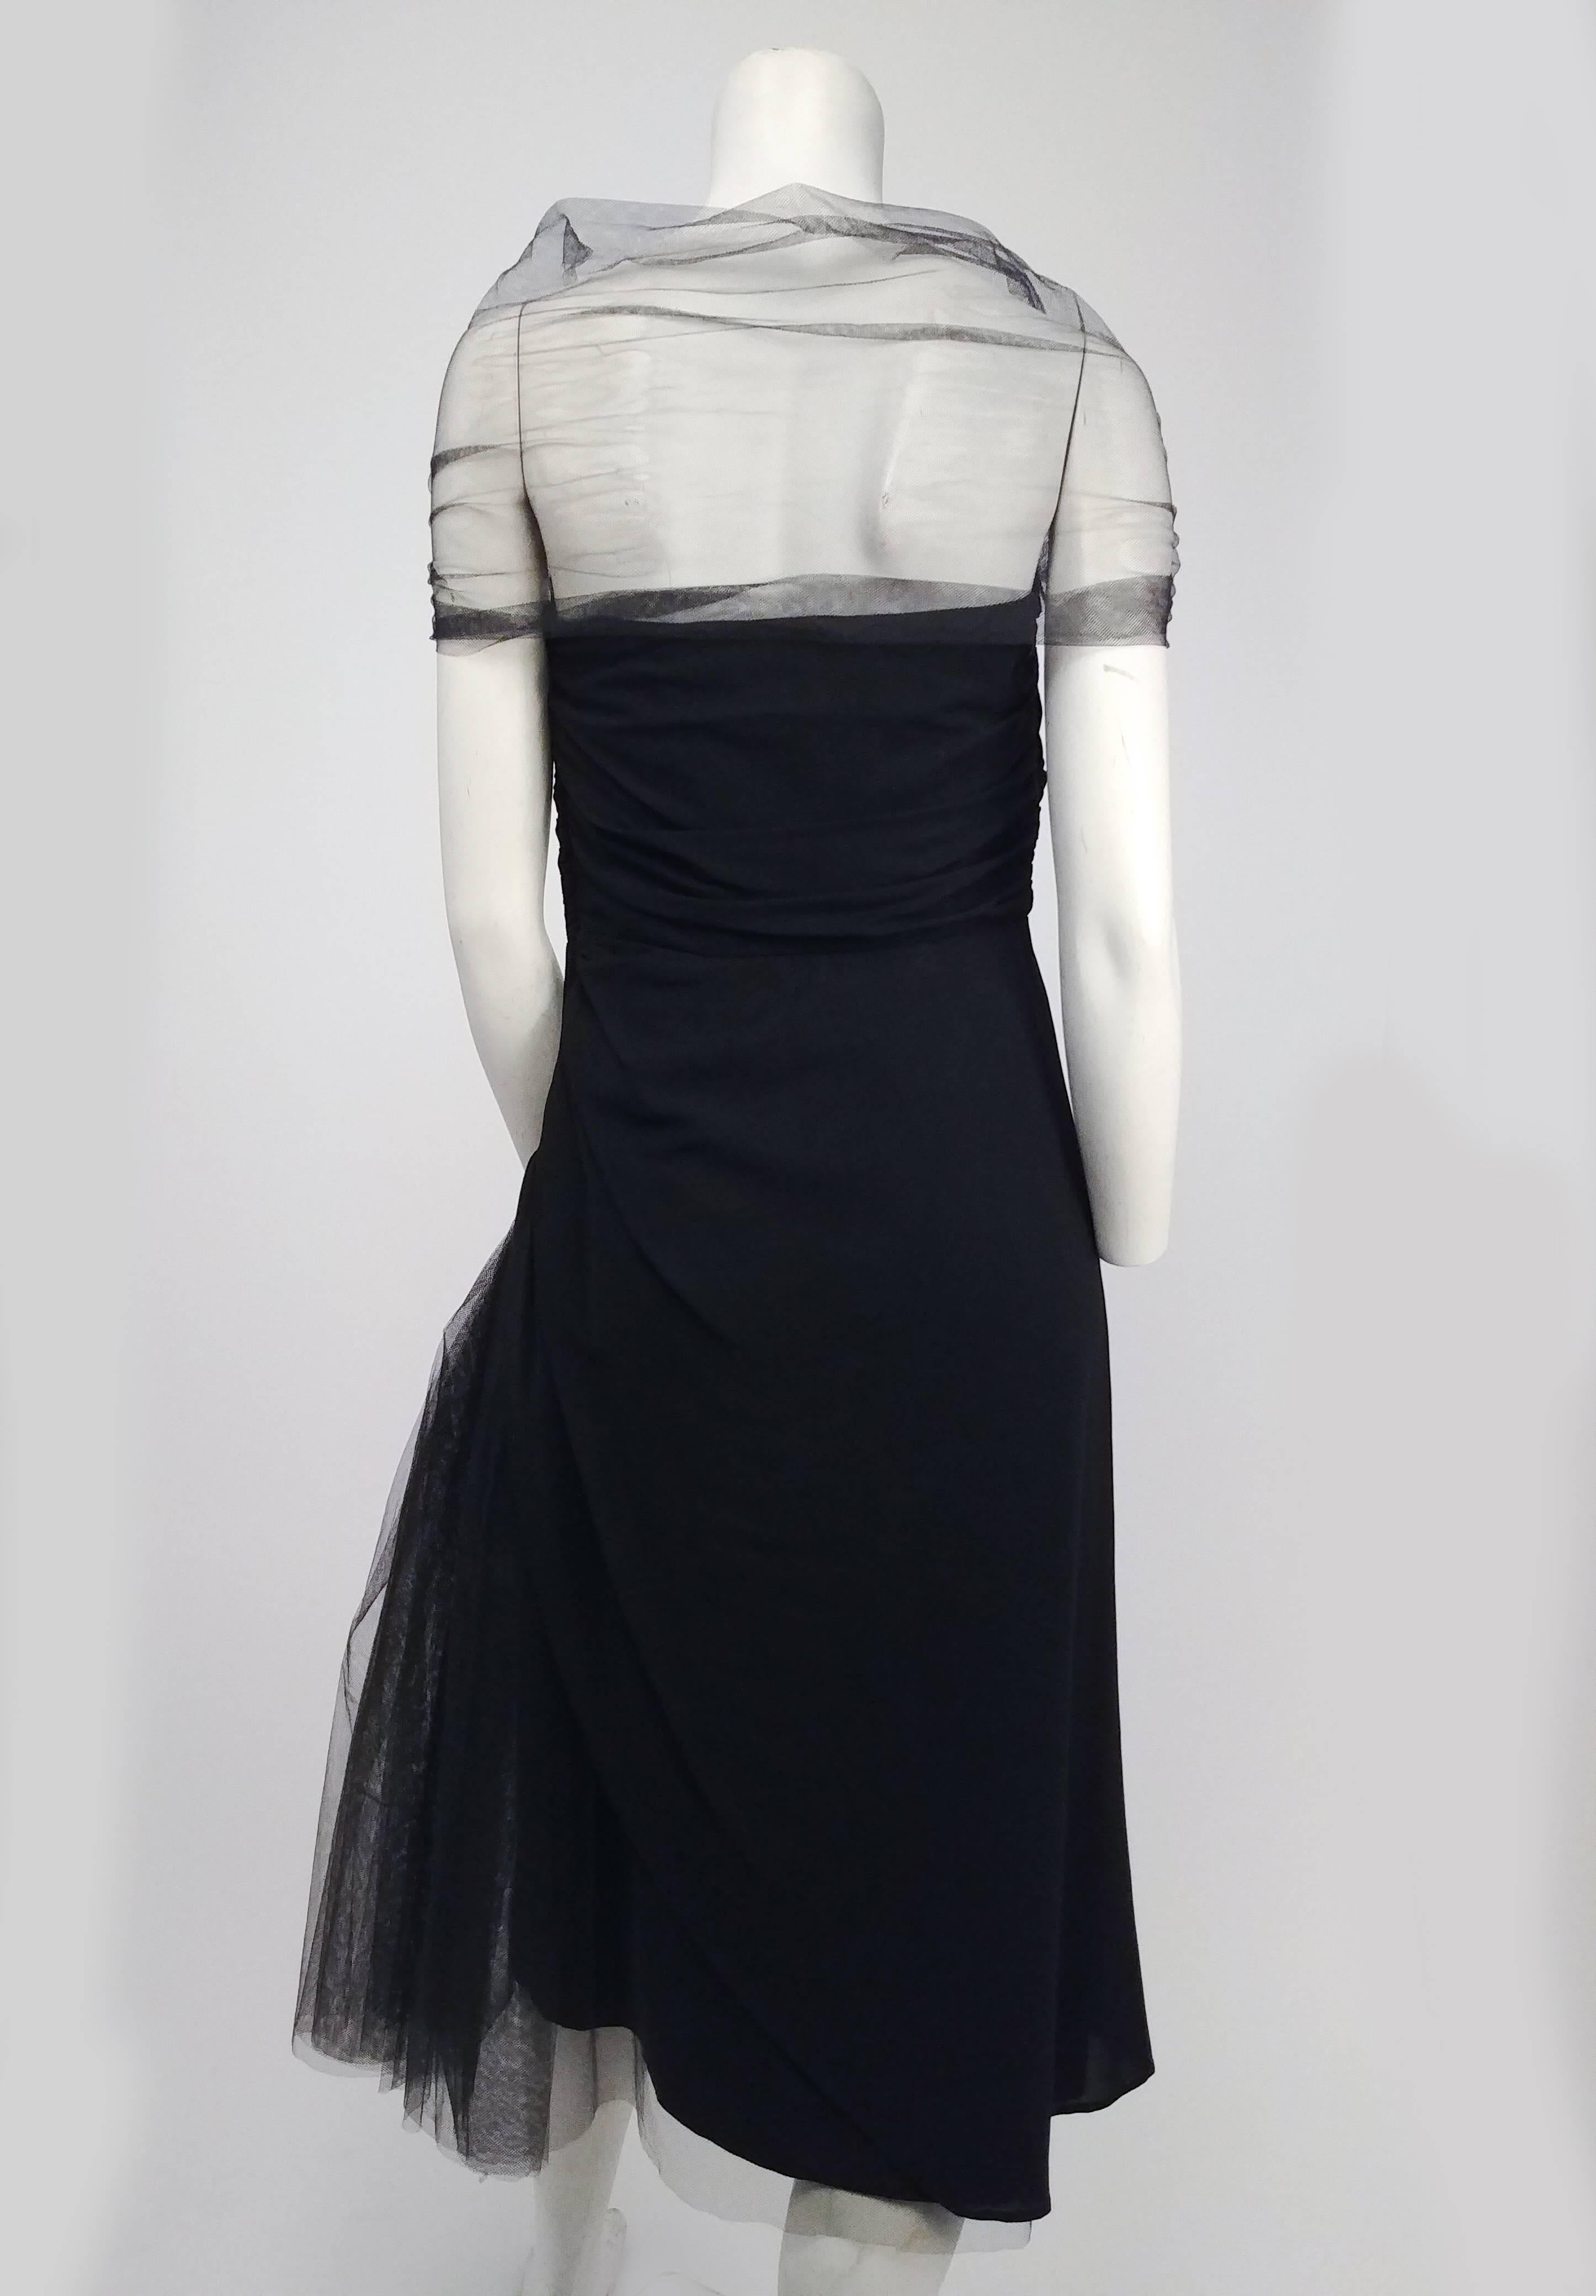 Black Cocktail Dress with Tulle Accents, 1950s 1